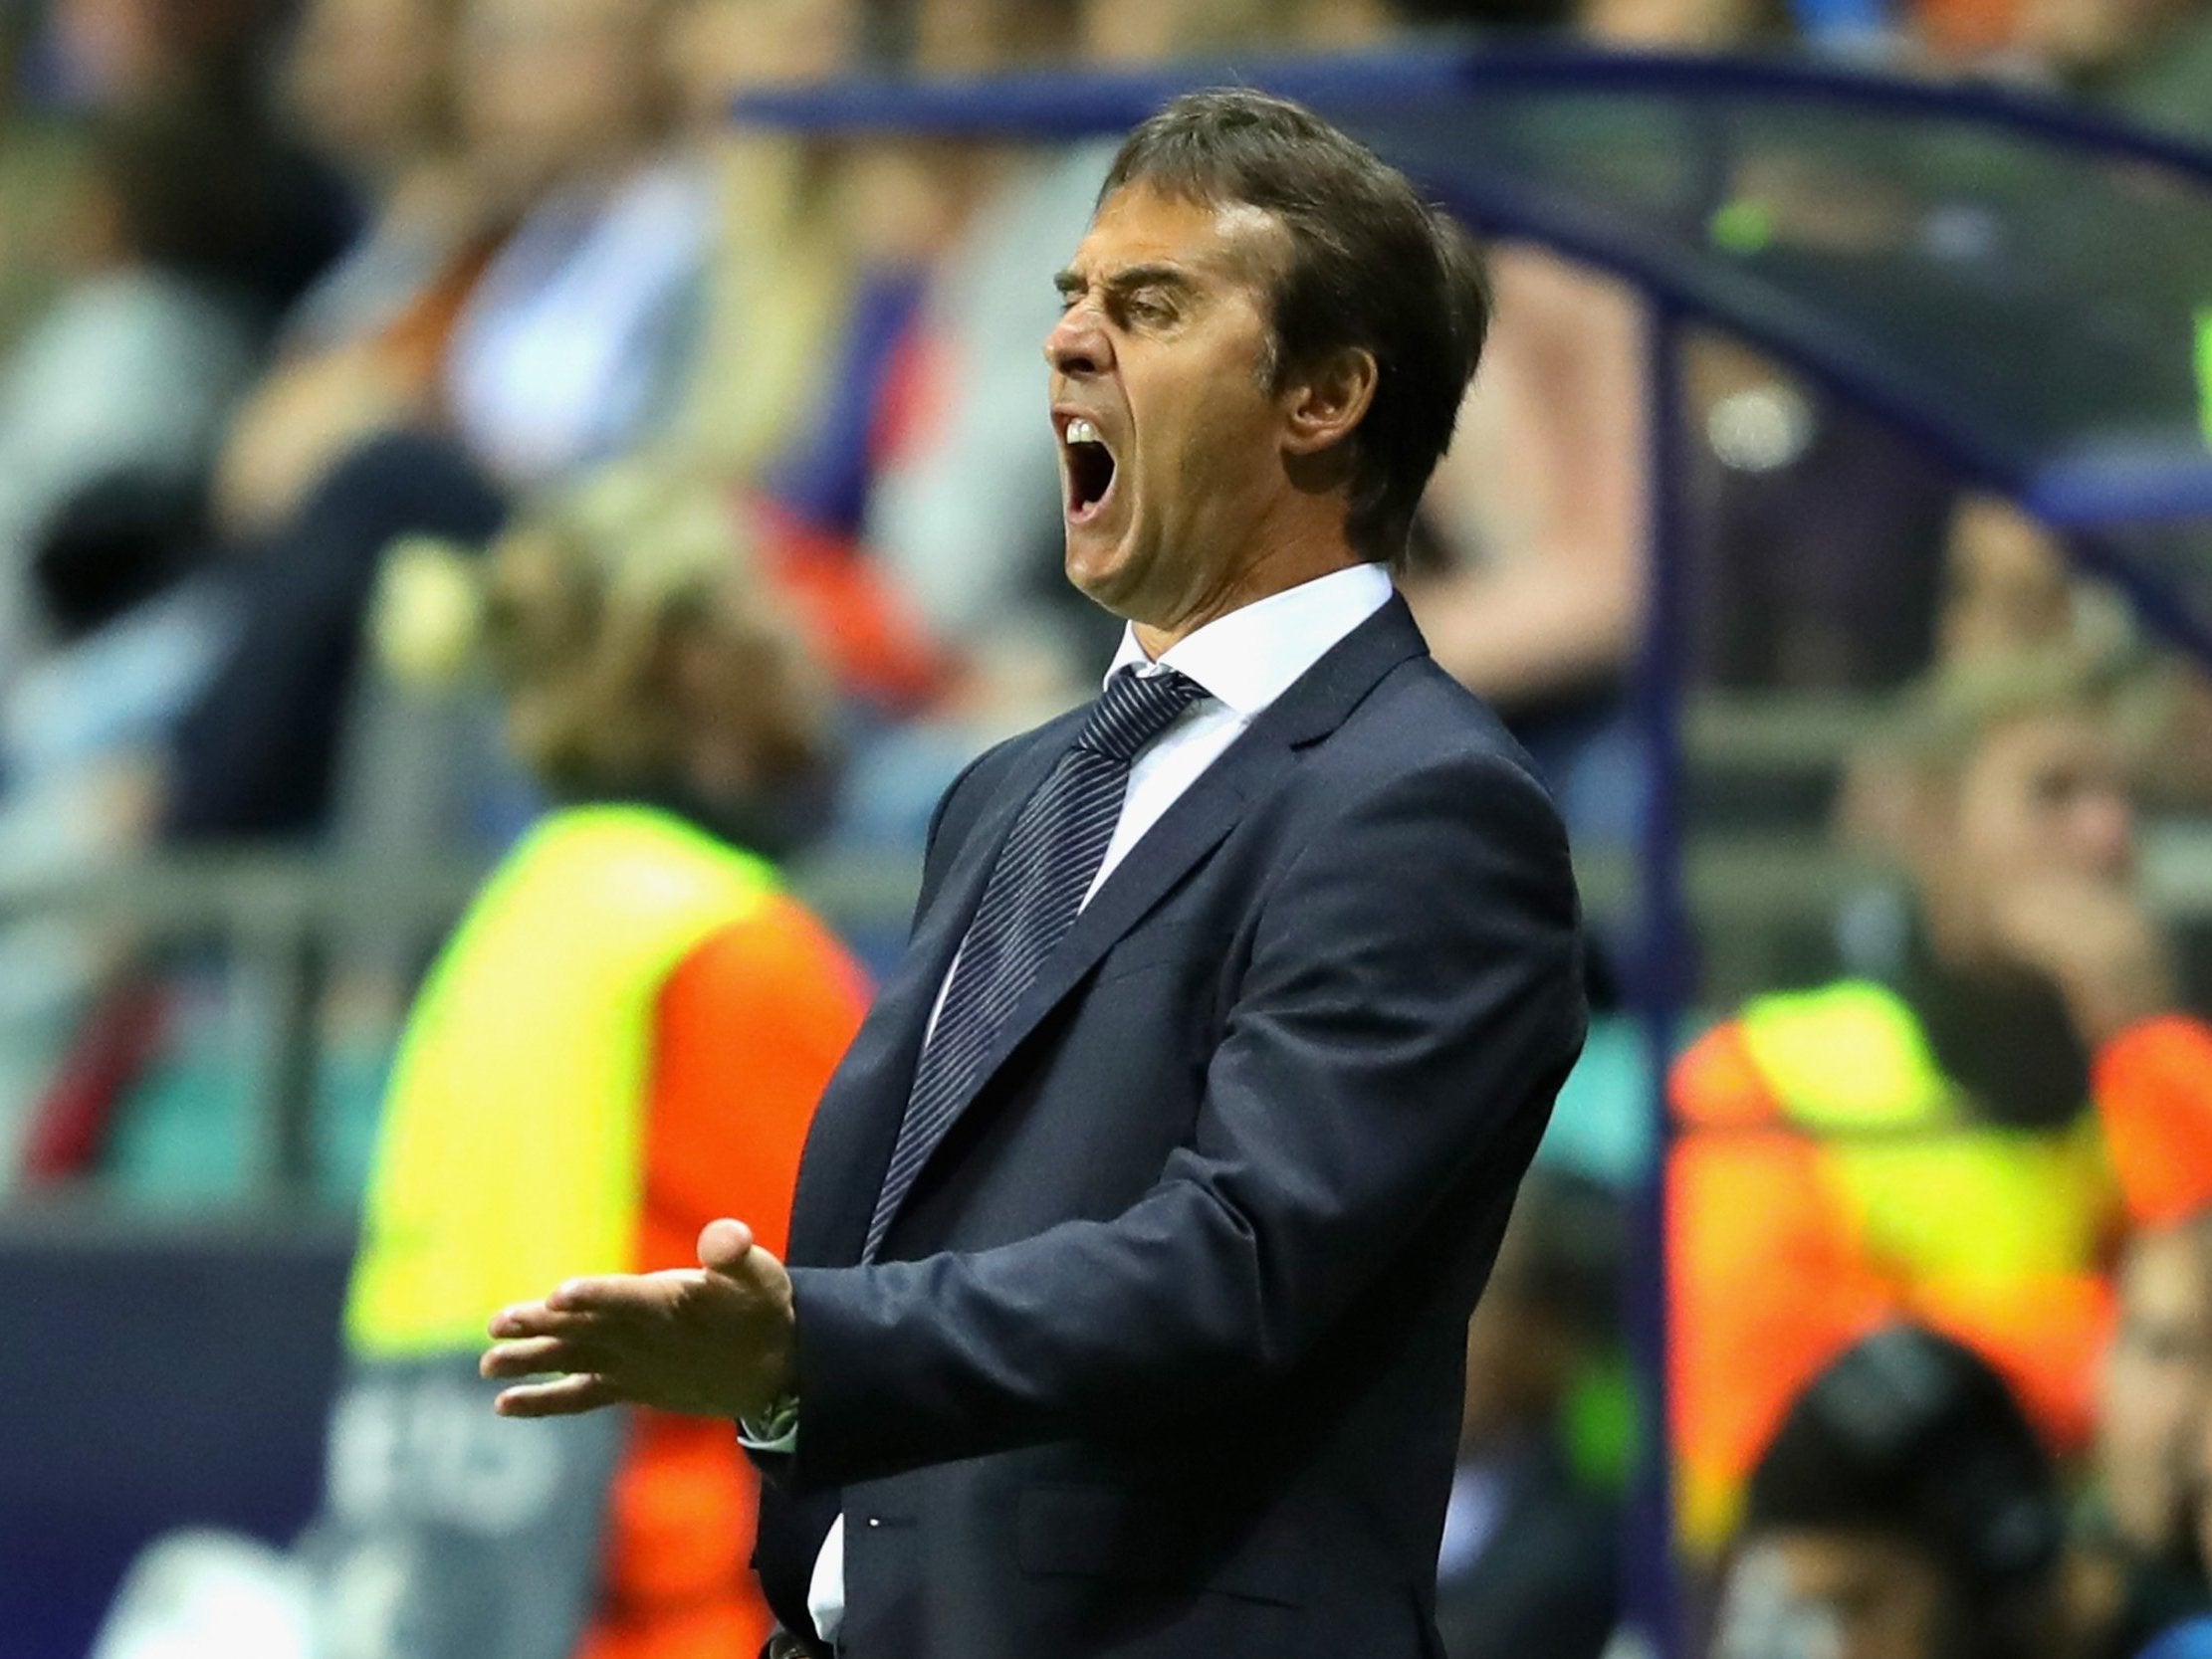 New Real Madrid manager Julen Lopetegui saw his side lose 4-2 to Atletico in the Uefa Super Cup